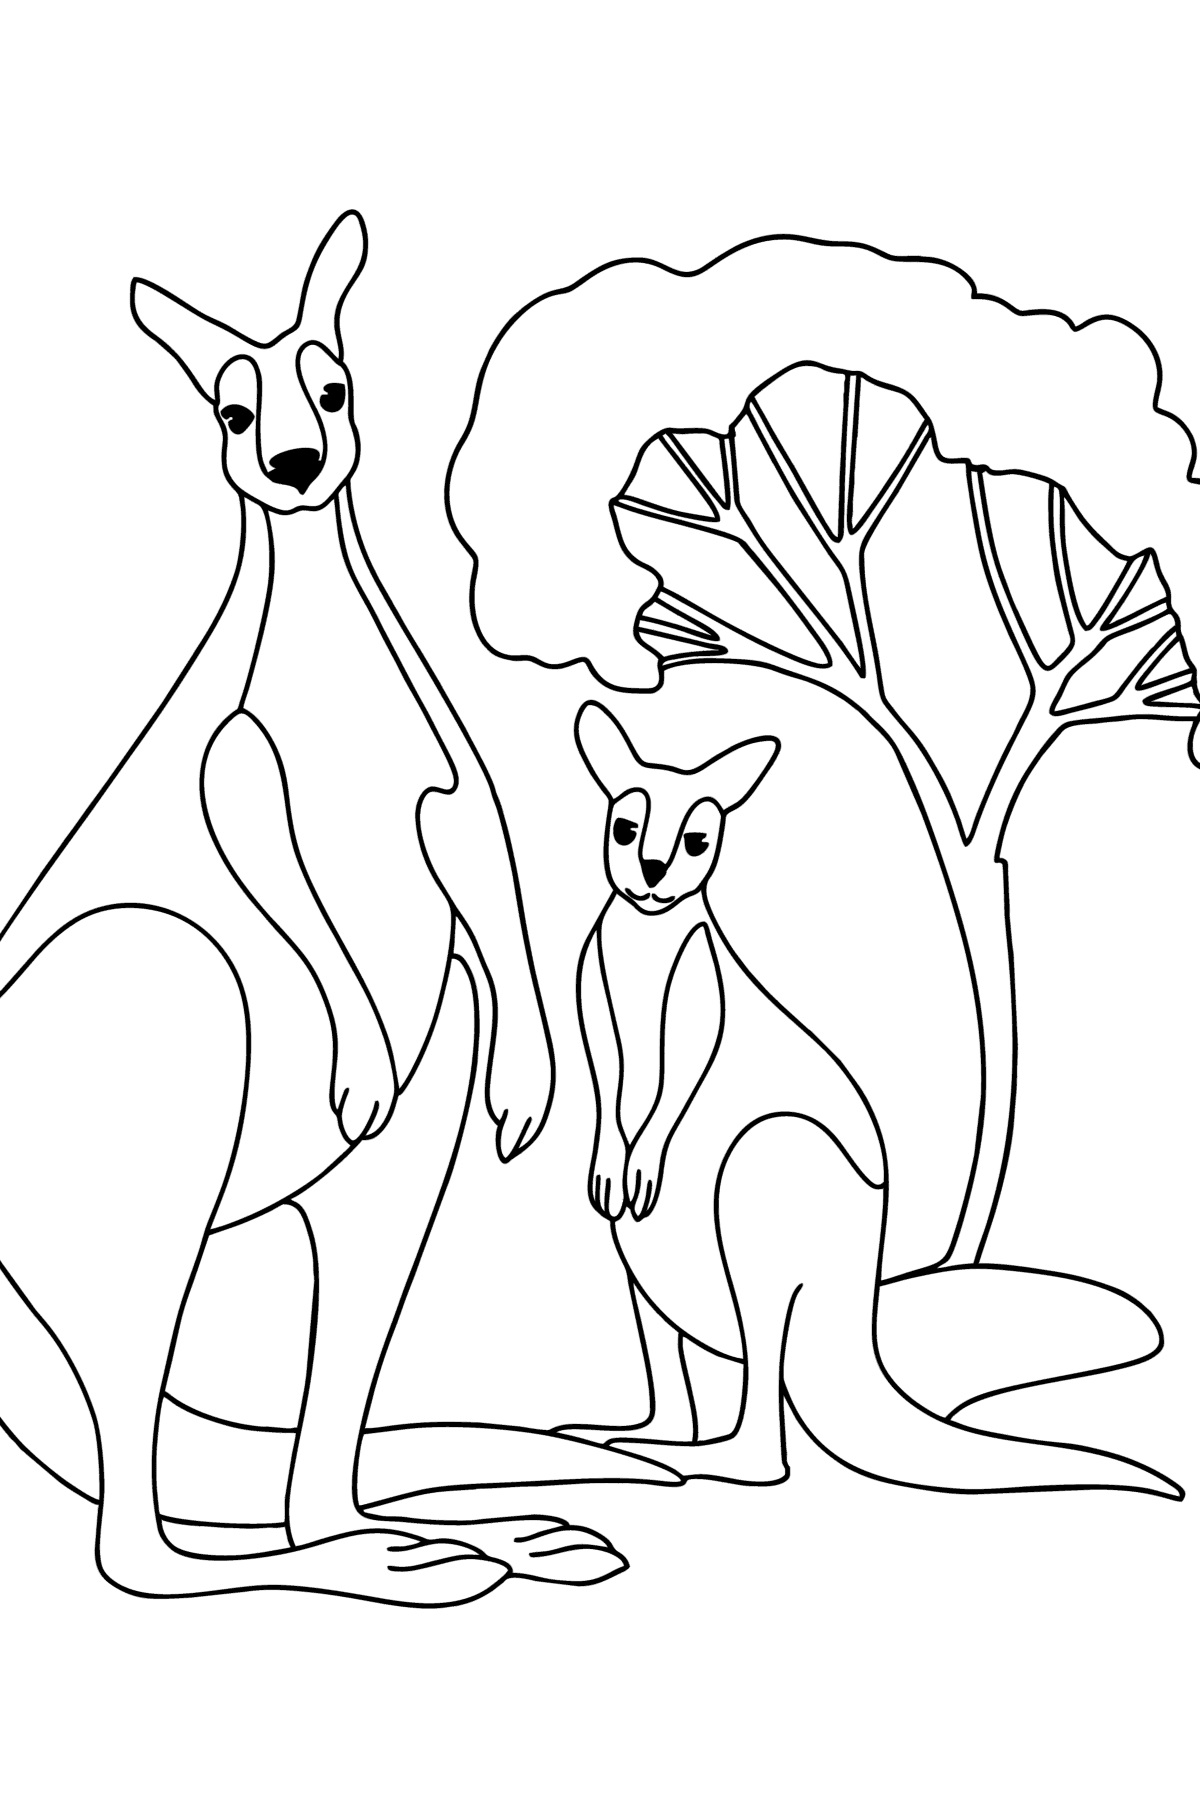 Kangaroo with Baby Coloring Page - Coloring Pages for Kids